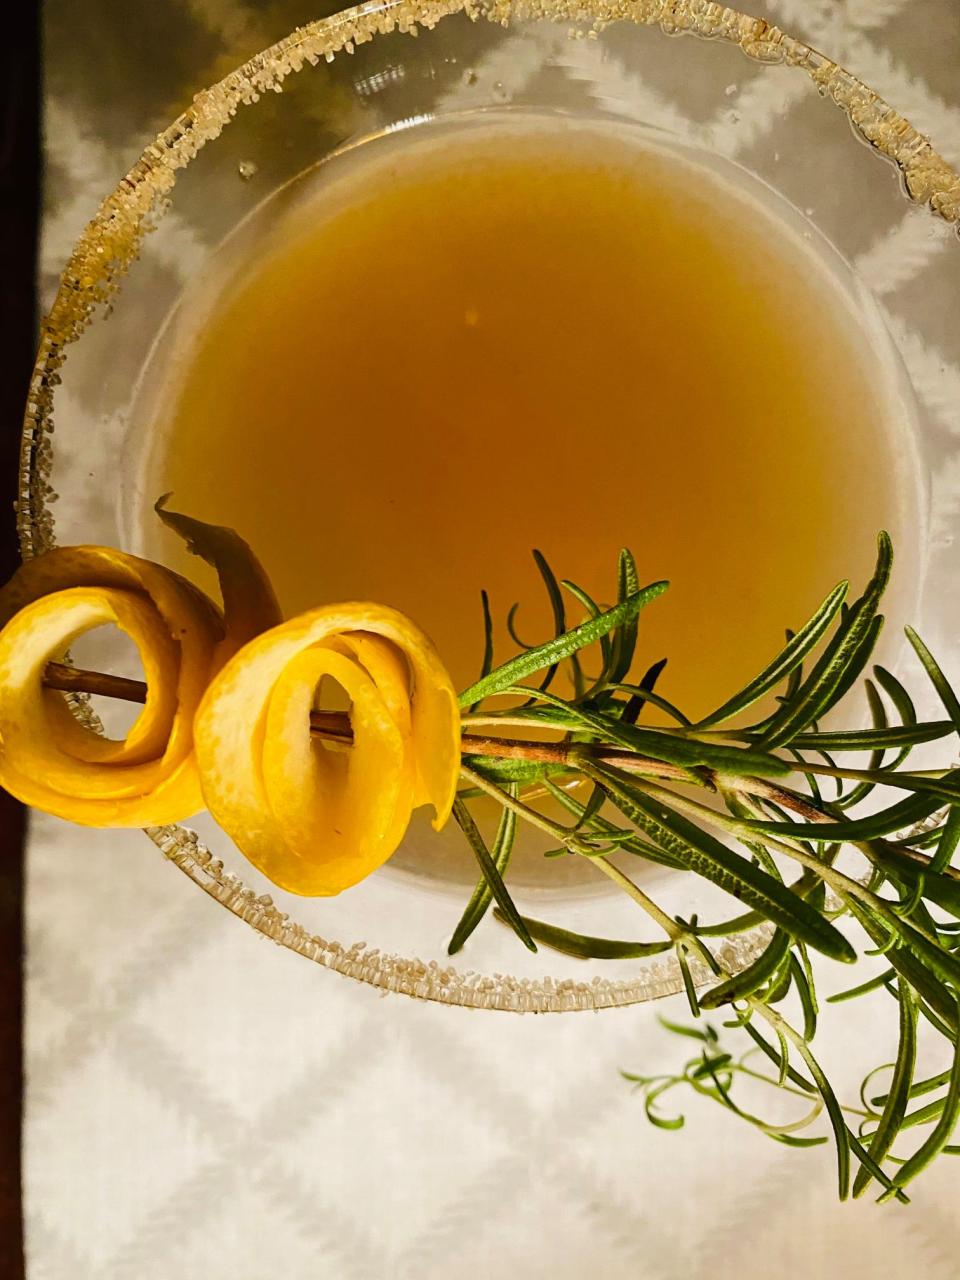 Extreme close-up of a cocktail garnished with thyme and lemon.